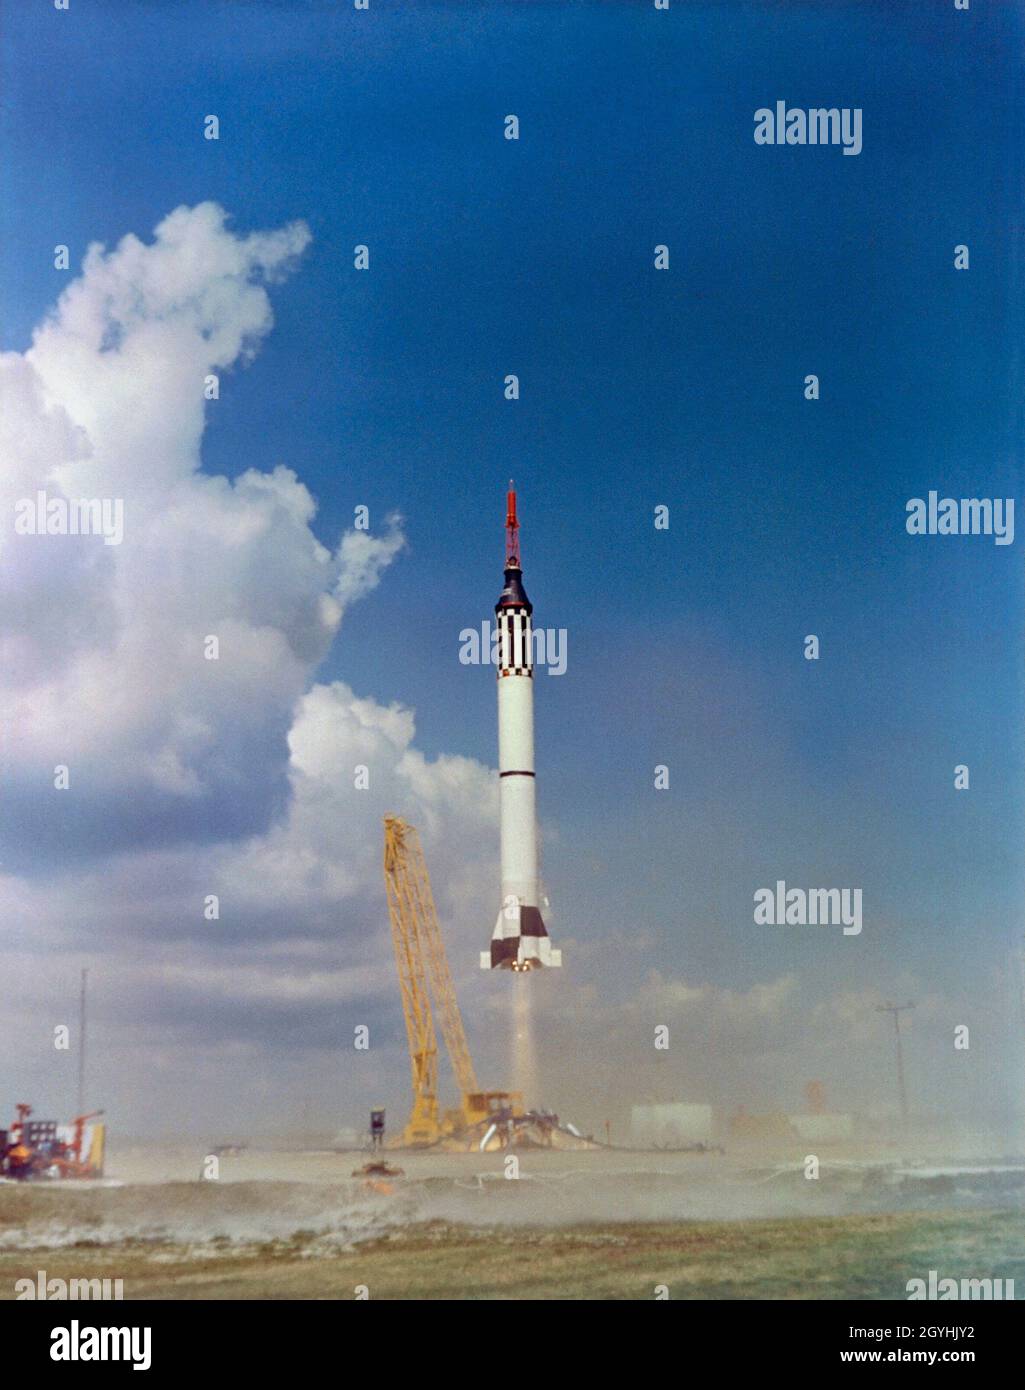 (31 Jan. 1961) --- The launch of the Mercury-Redstone 2 (MR-2) suborbital mission from Cape Canaveral, Florida, on Jan. 31, 1961. Onboard the spacecraft was ?Ham?, a 37-pound chimpanzee. Despite an over-acceleration factor, the flight was considered to be successful. Following recovery Ham appeared to be in good physiological condition, but sometime later when he was shown the Mercury spacecraft it was visually apparent that he had no further interest in cooperating with the spaceflight program Stock Photo